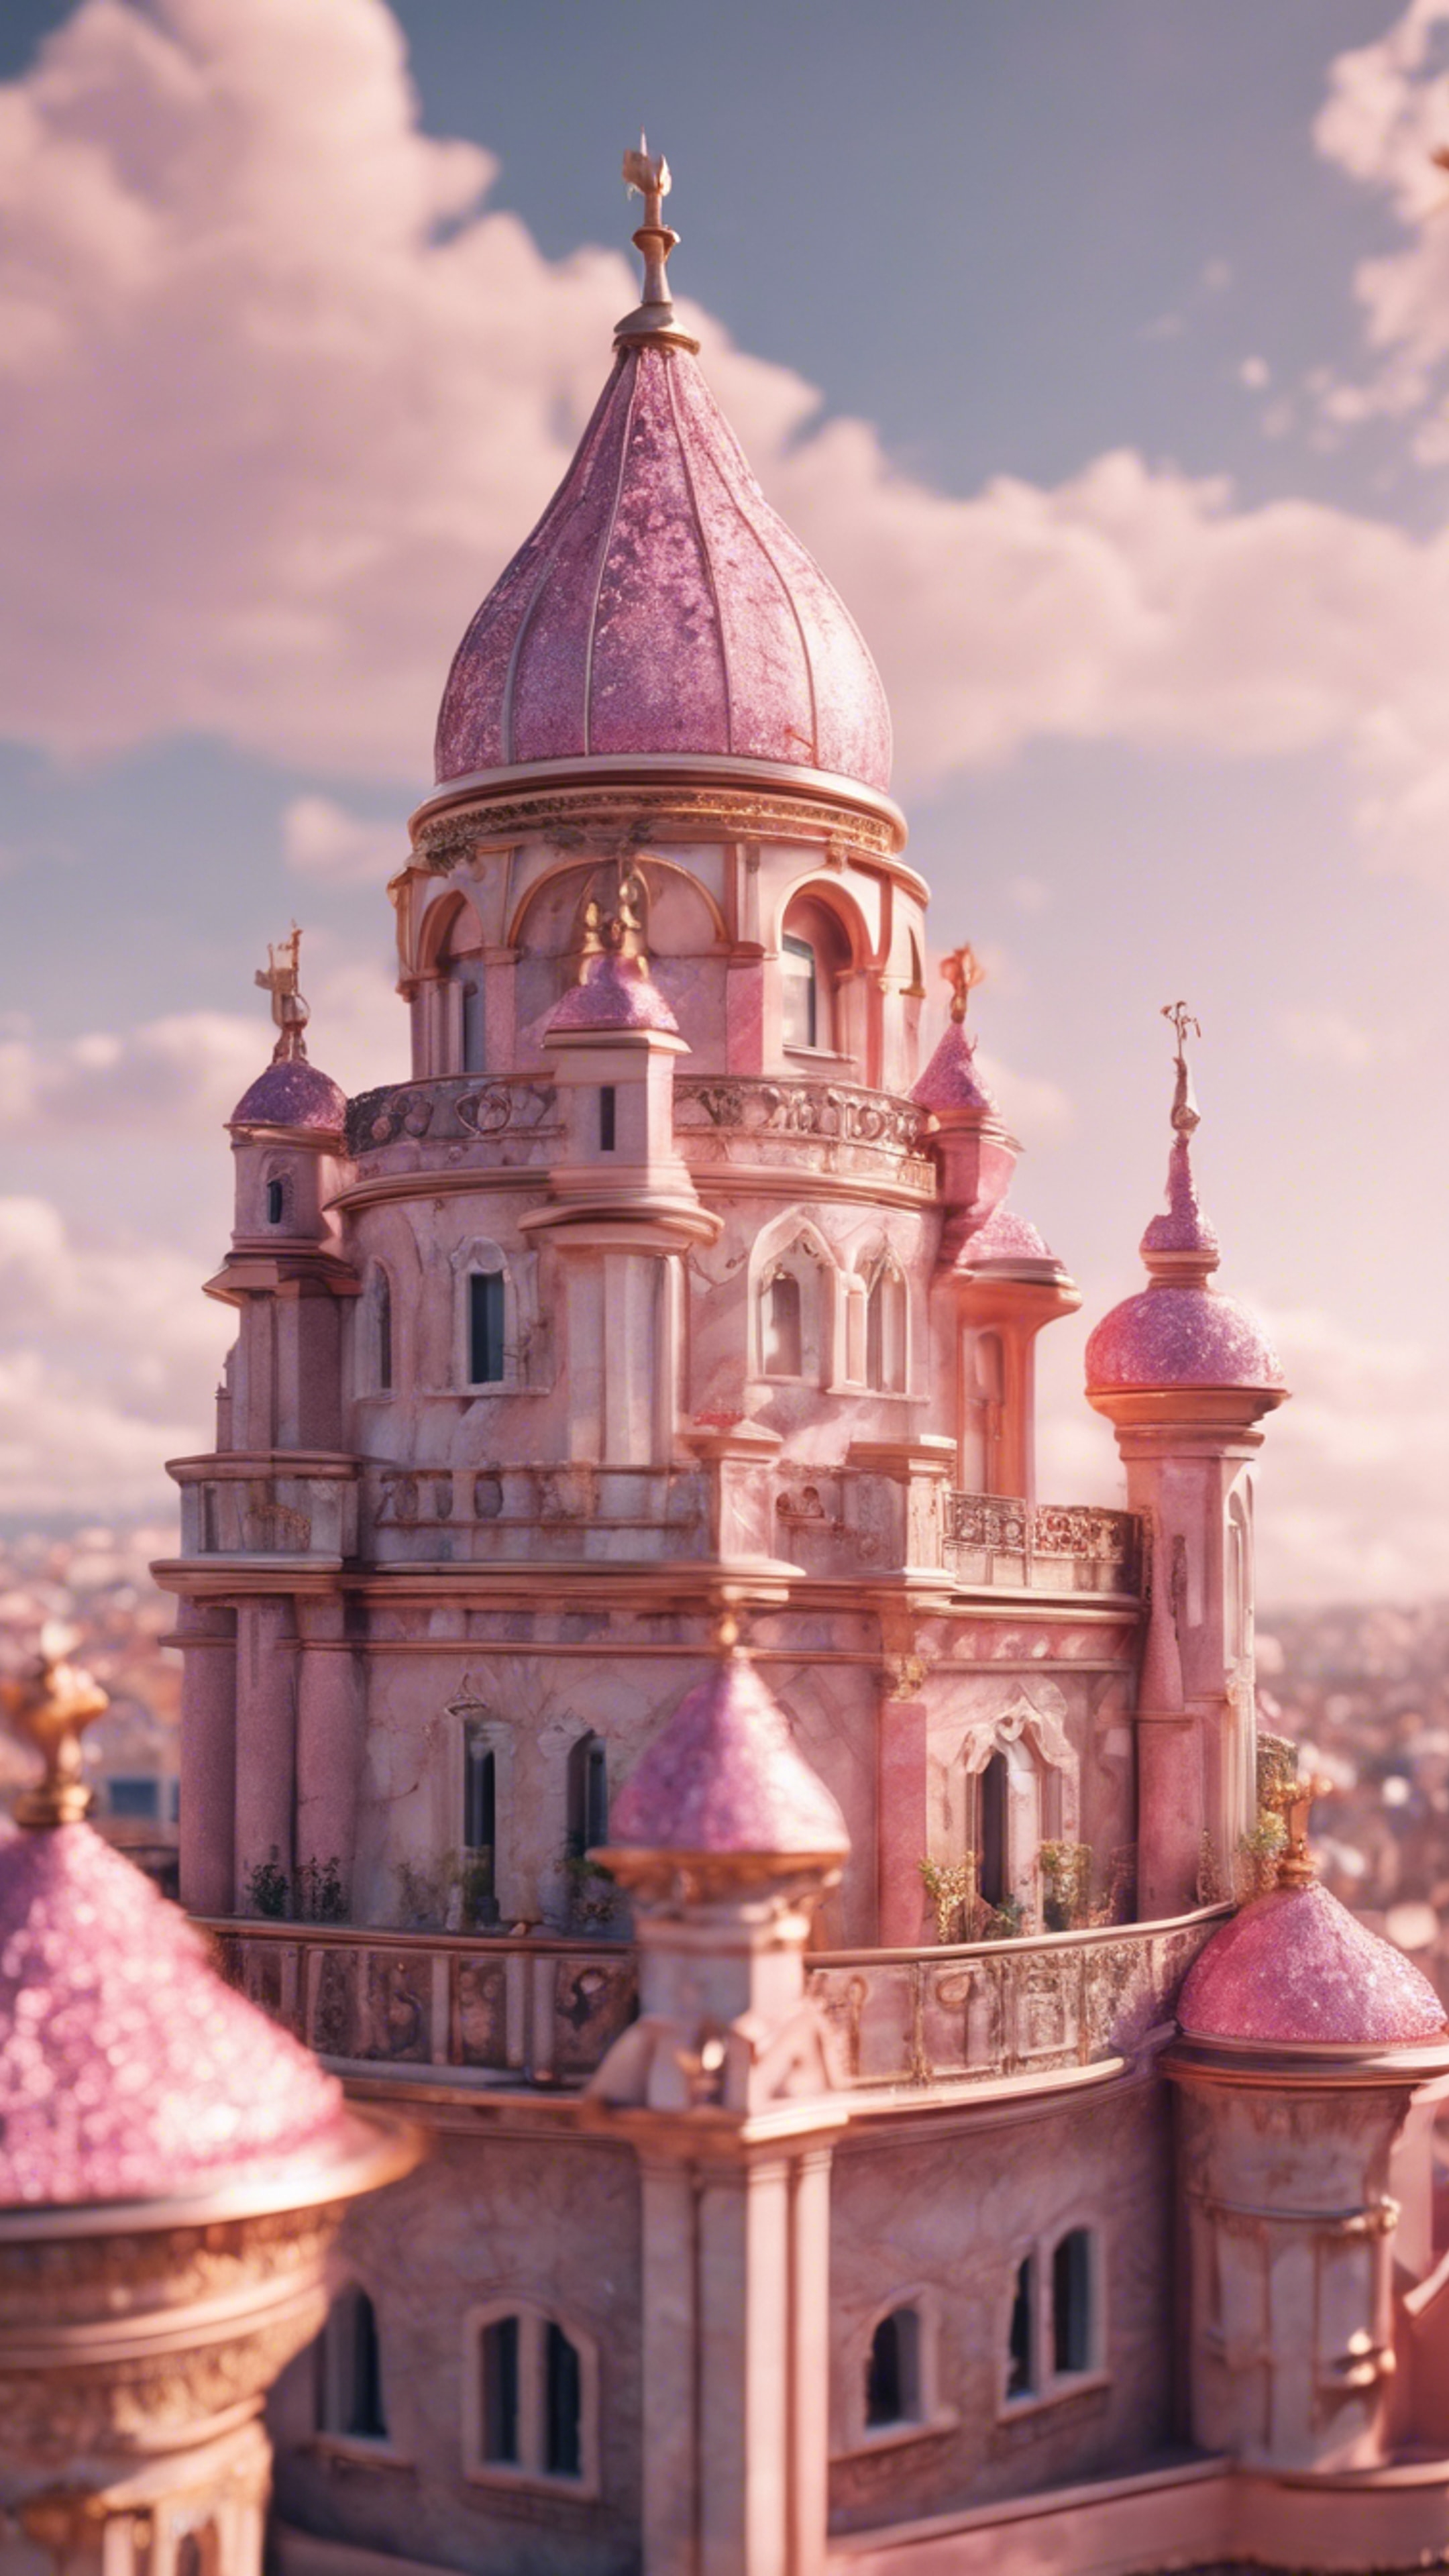 An ornate pink marble castle with glimmering golden rooftops during a sunny afternoon. Wallpaper[39cdf807c12f4b9c8dd2]